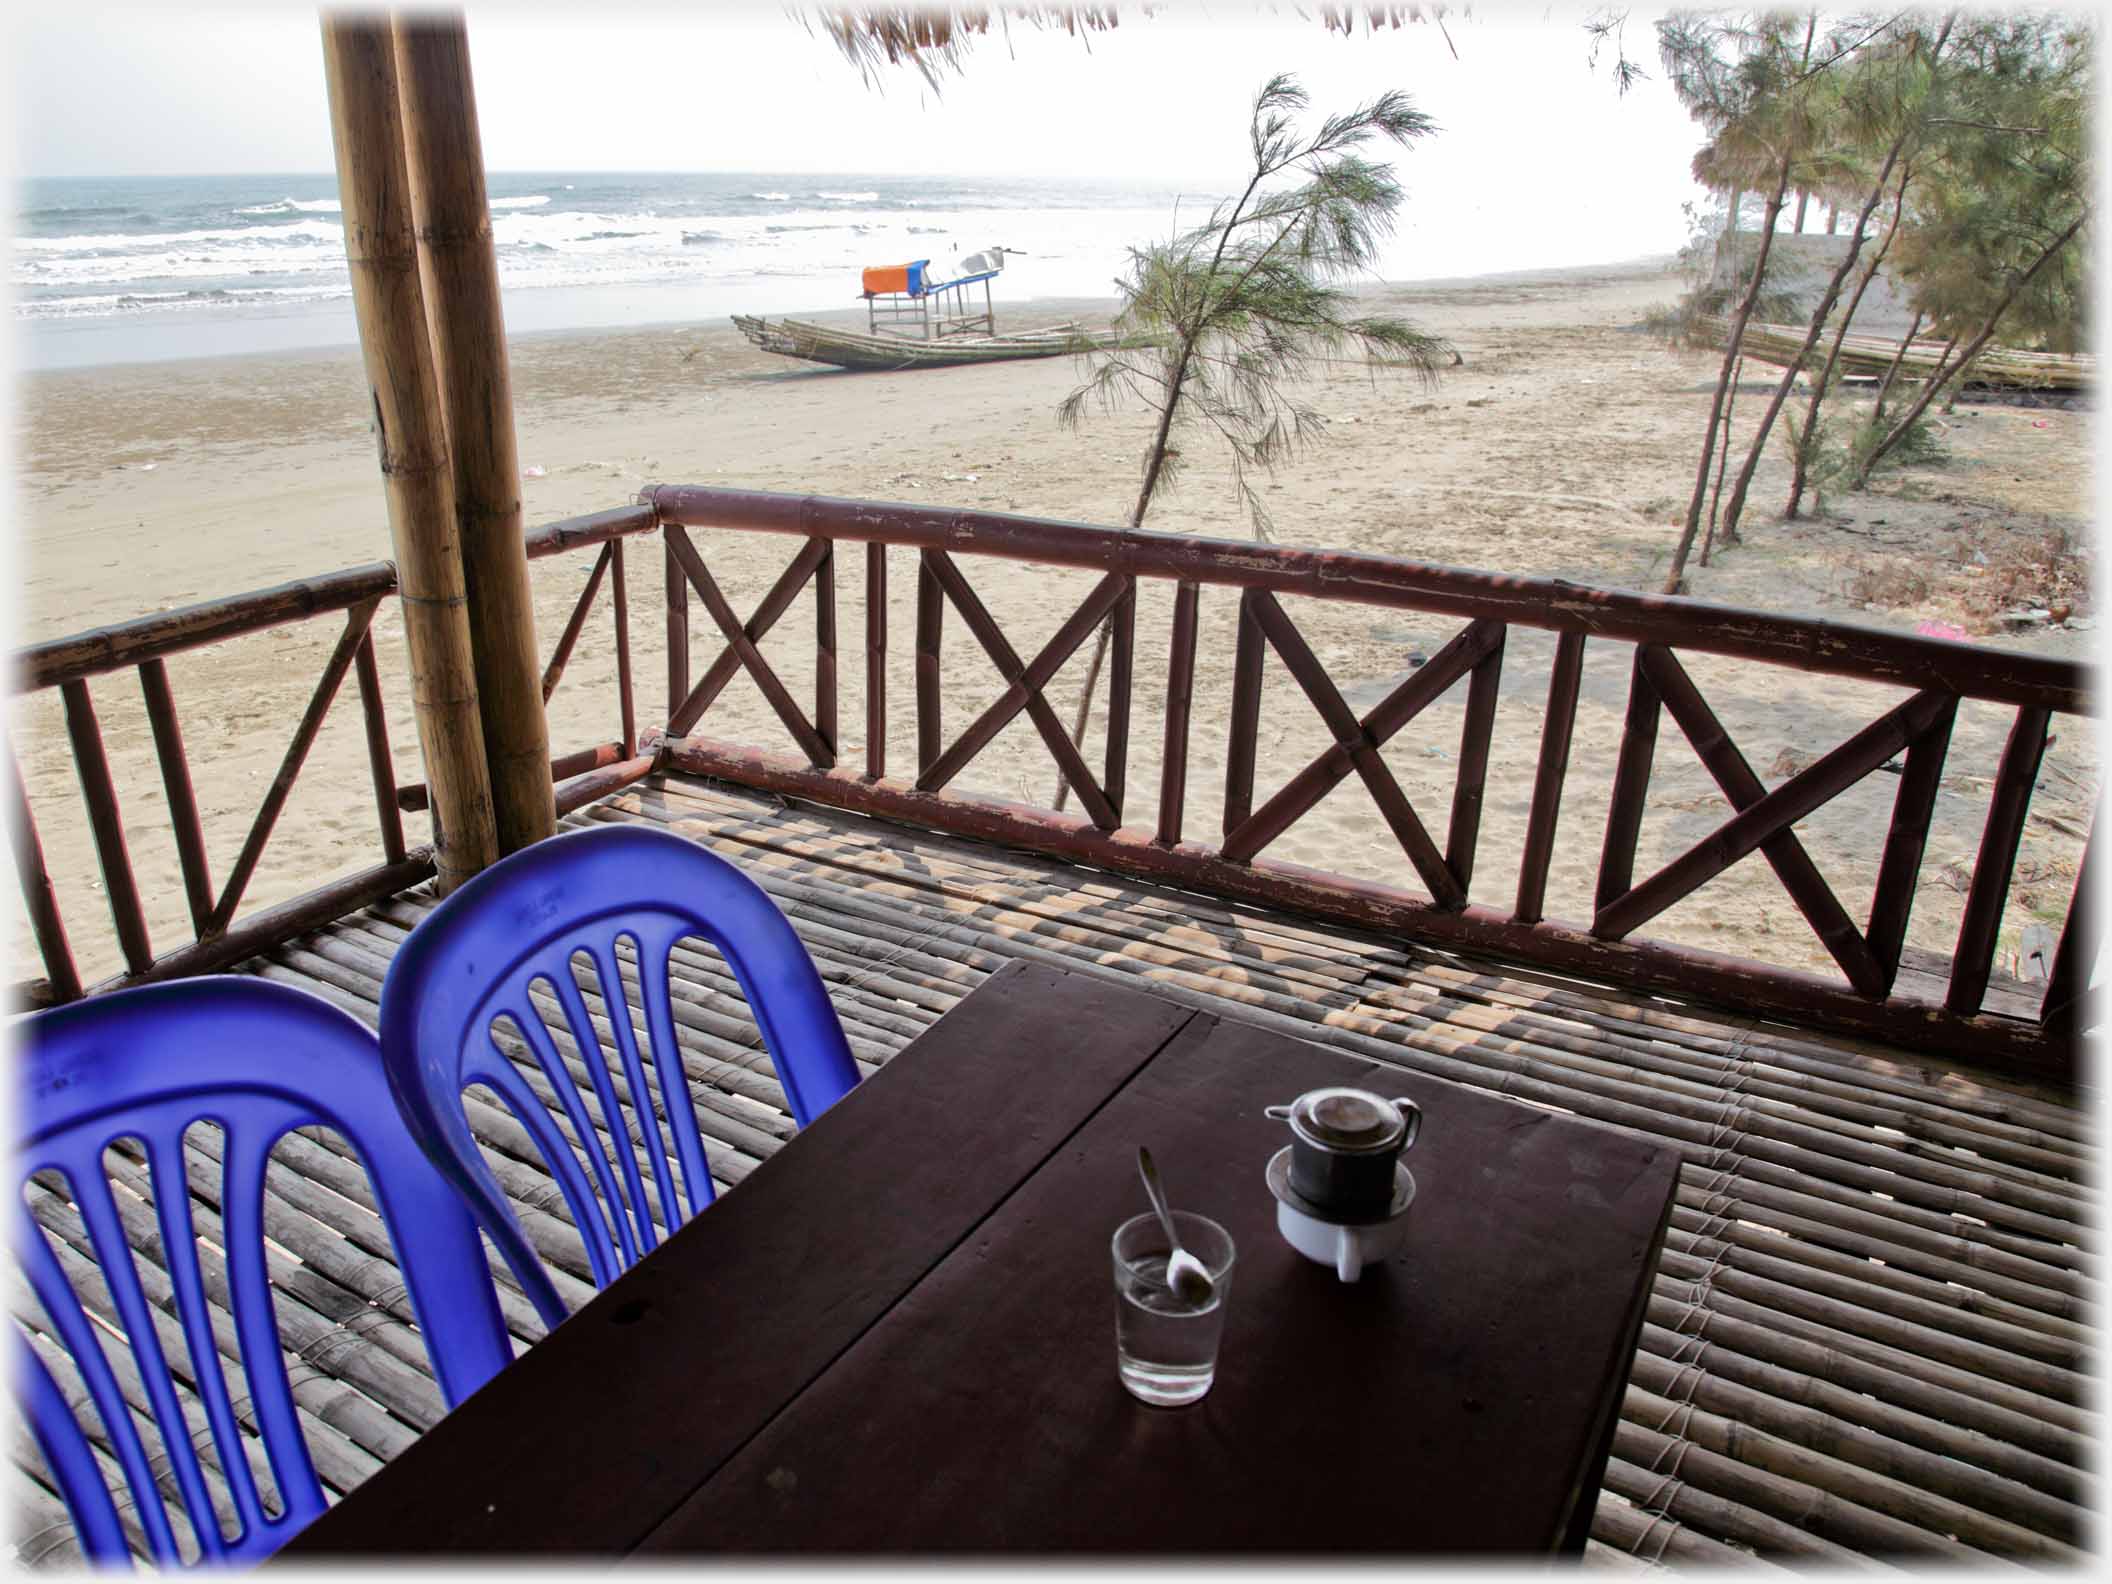 Coffee filtering into a cup with glass of water on table, on veranda, next to beach, boat and sea.